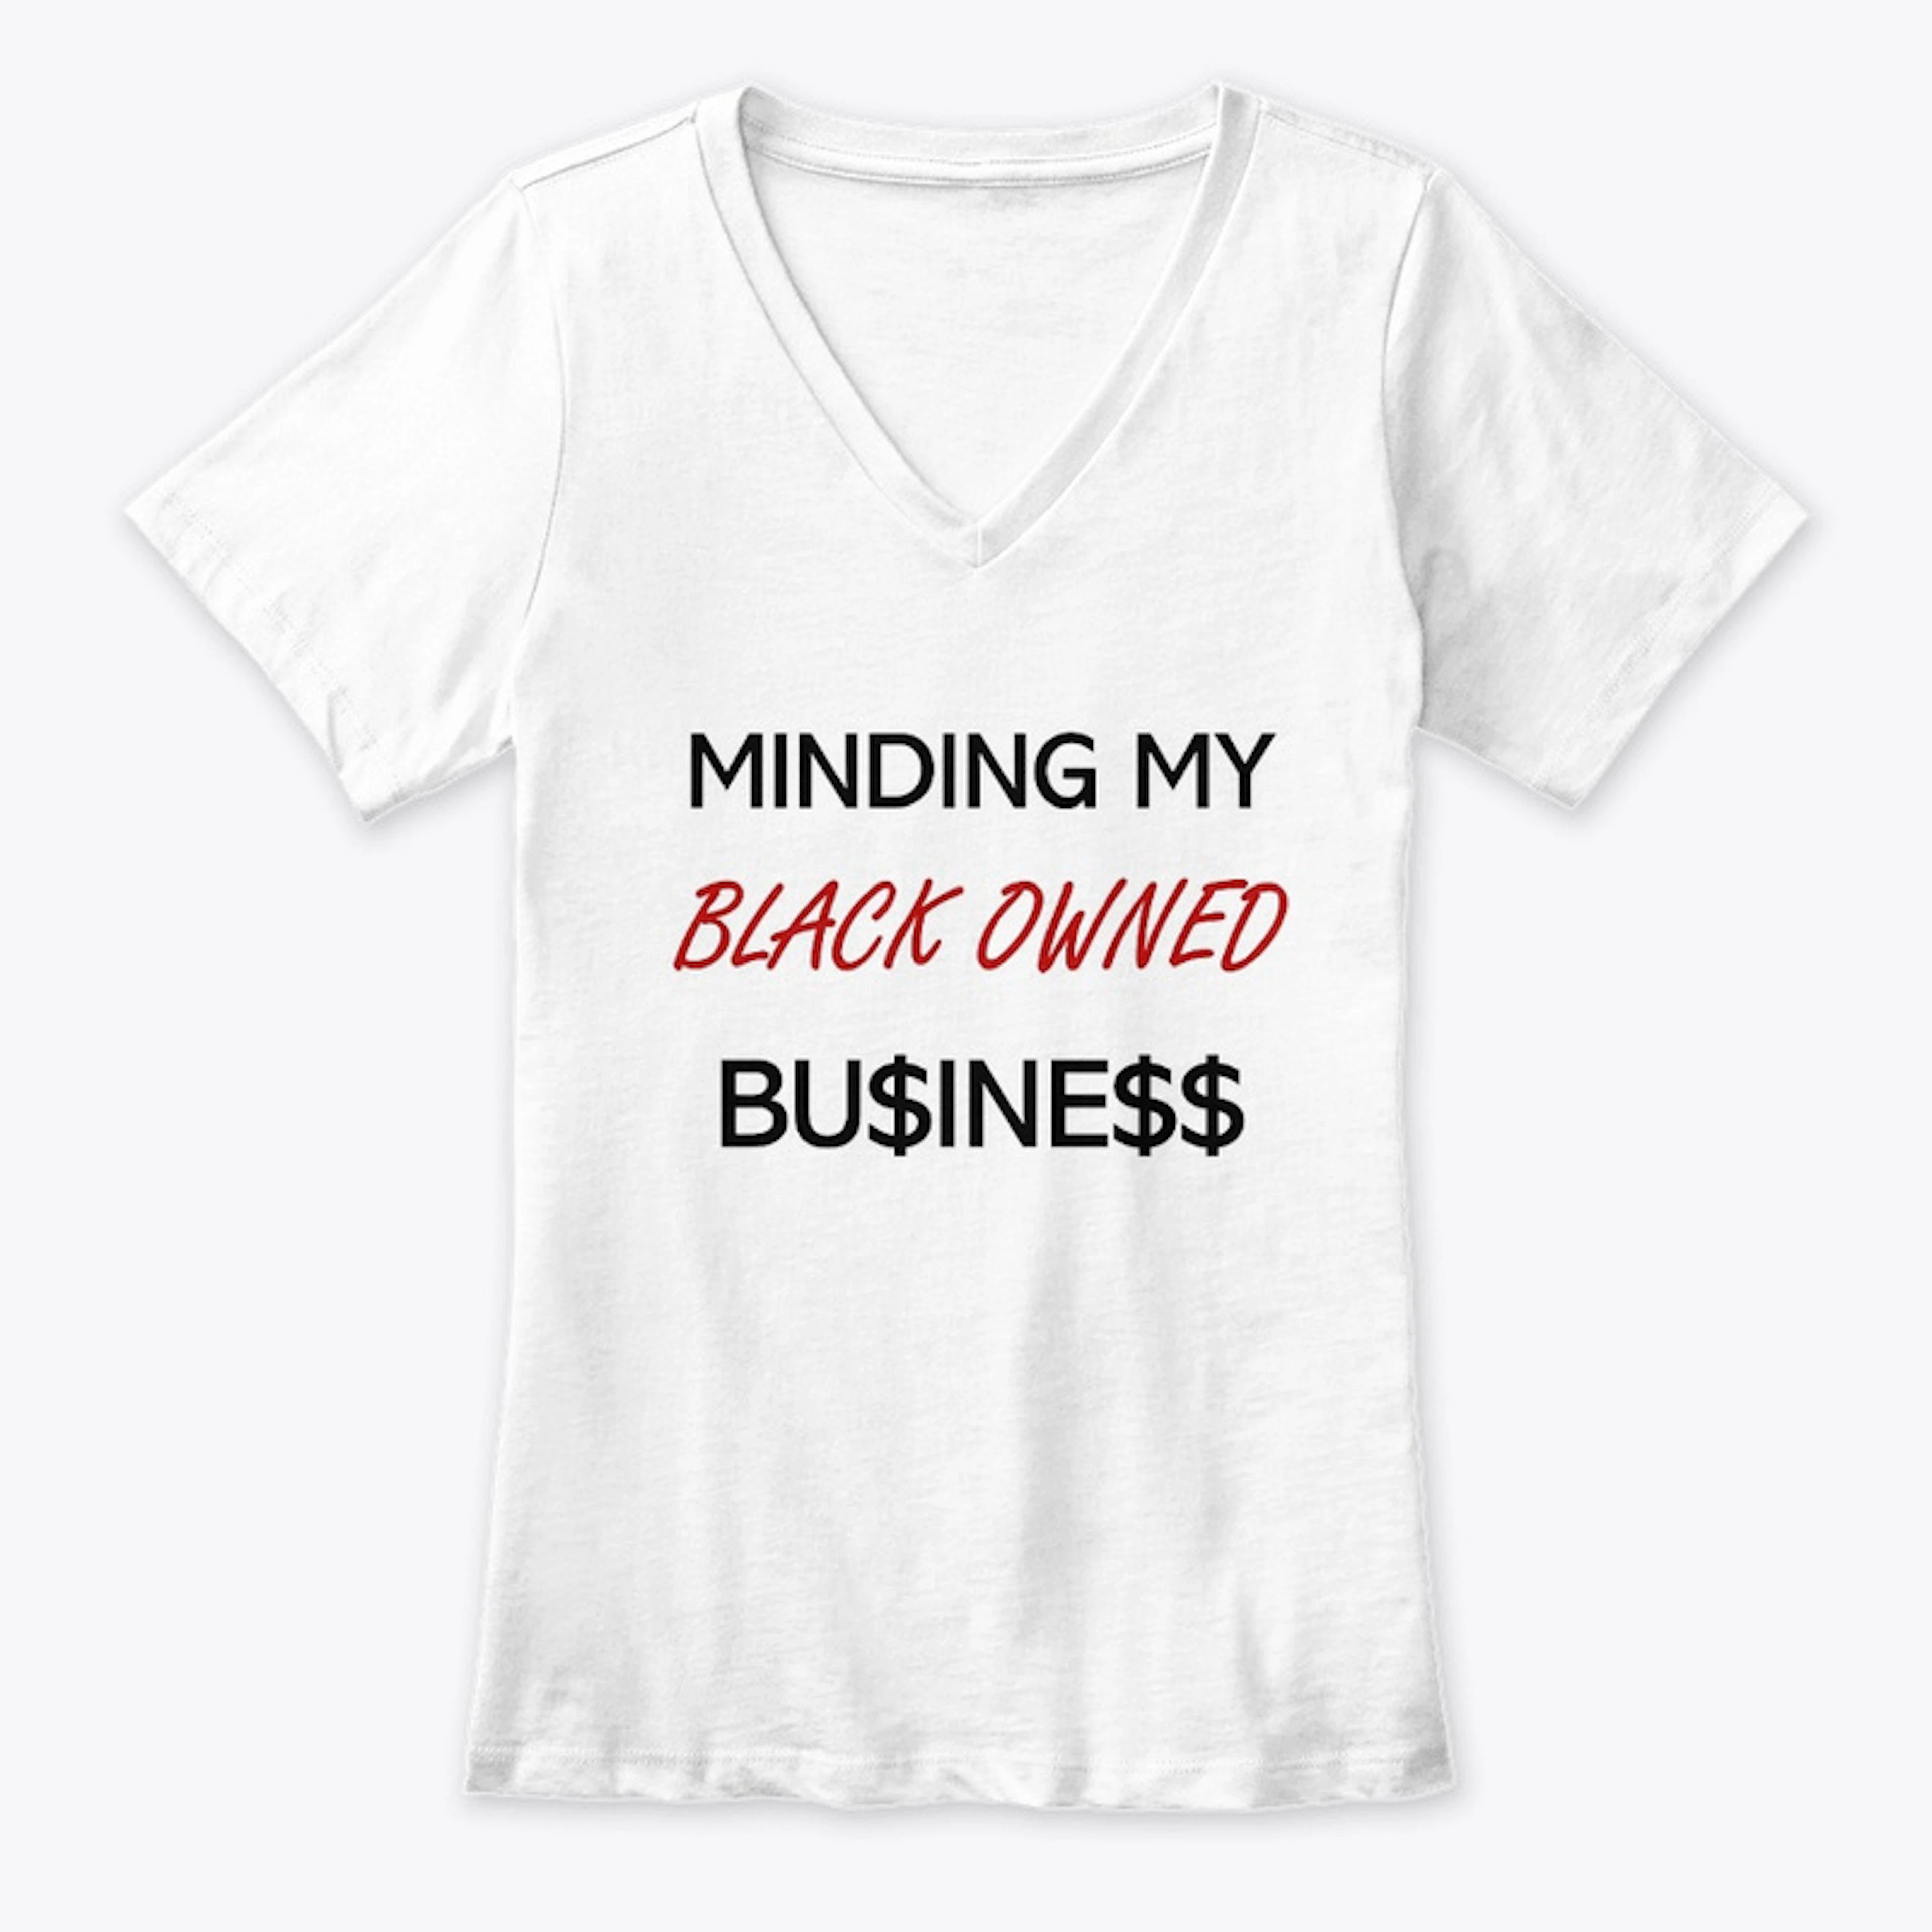 Minding my black own business tees